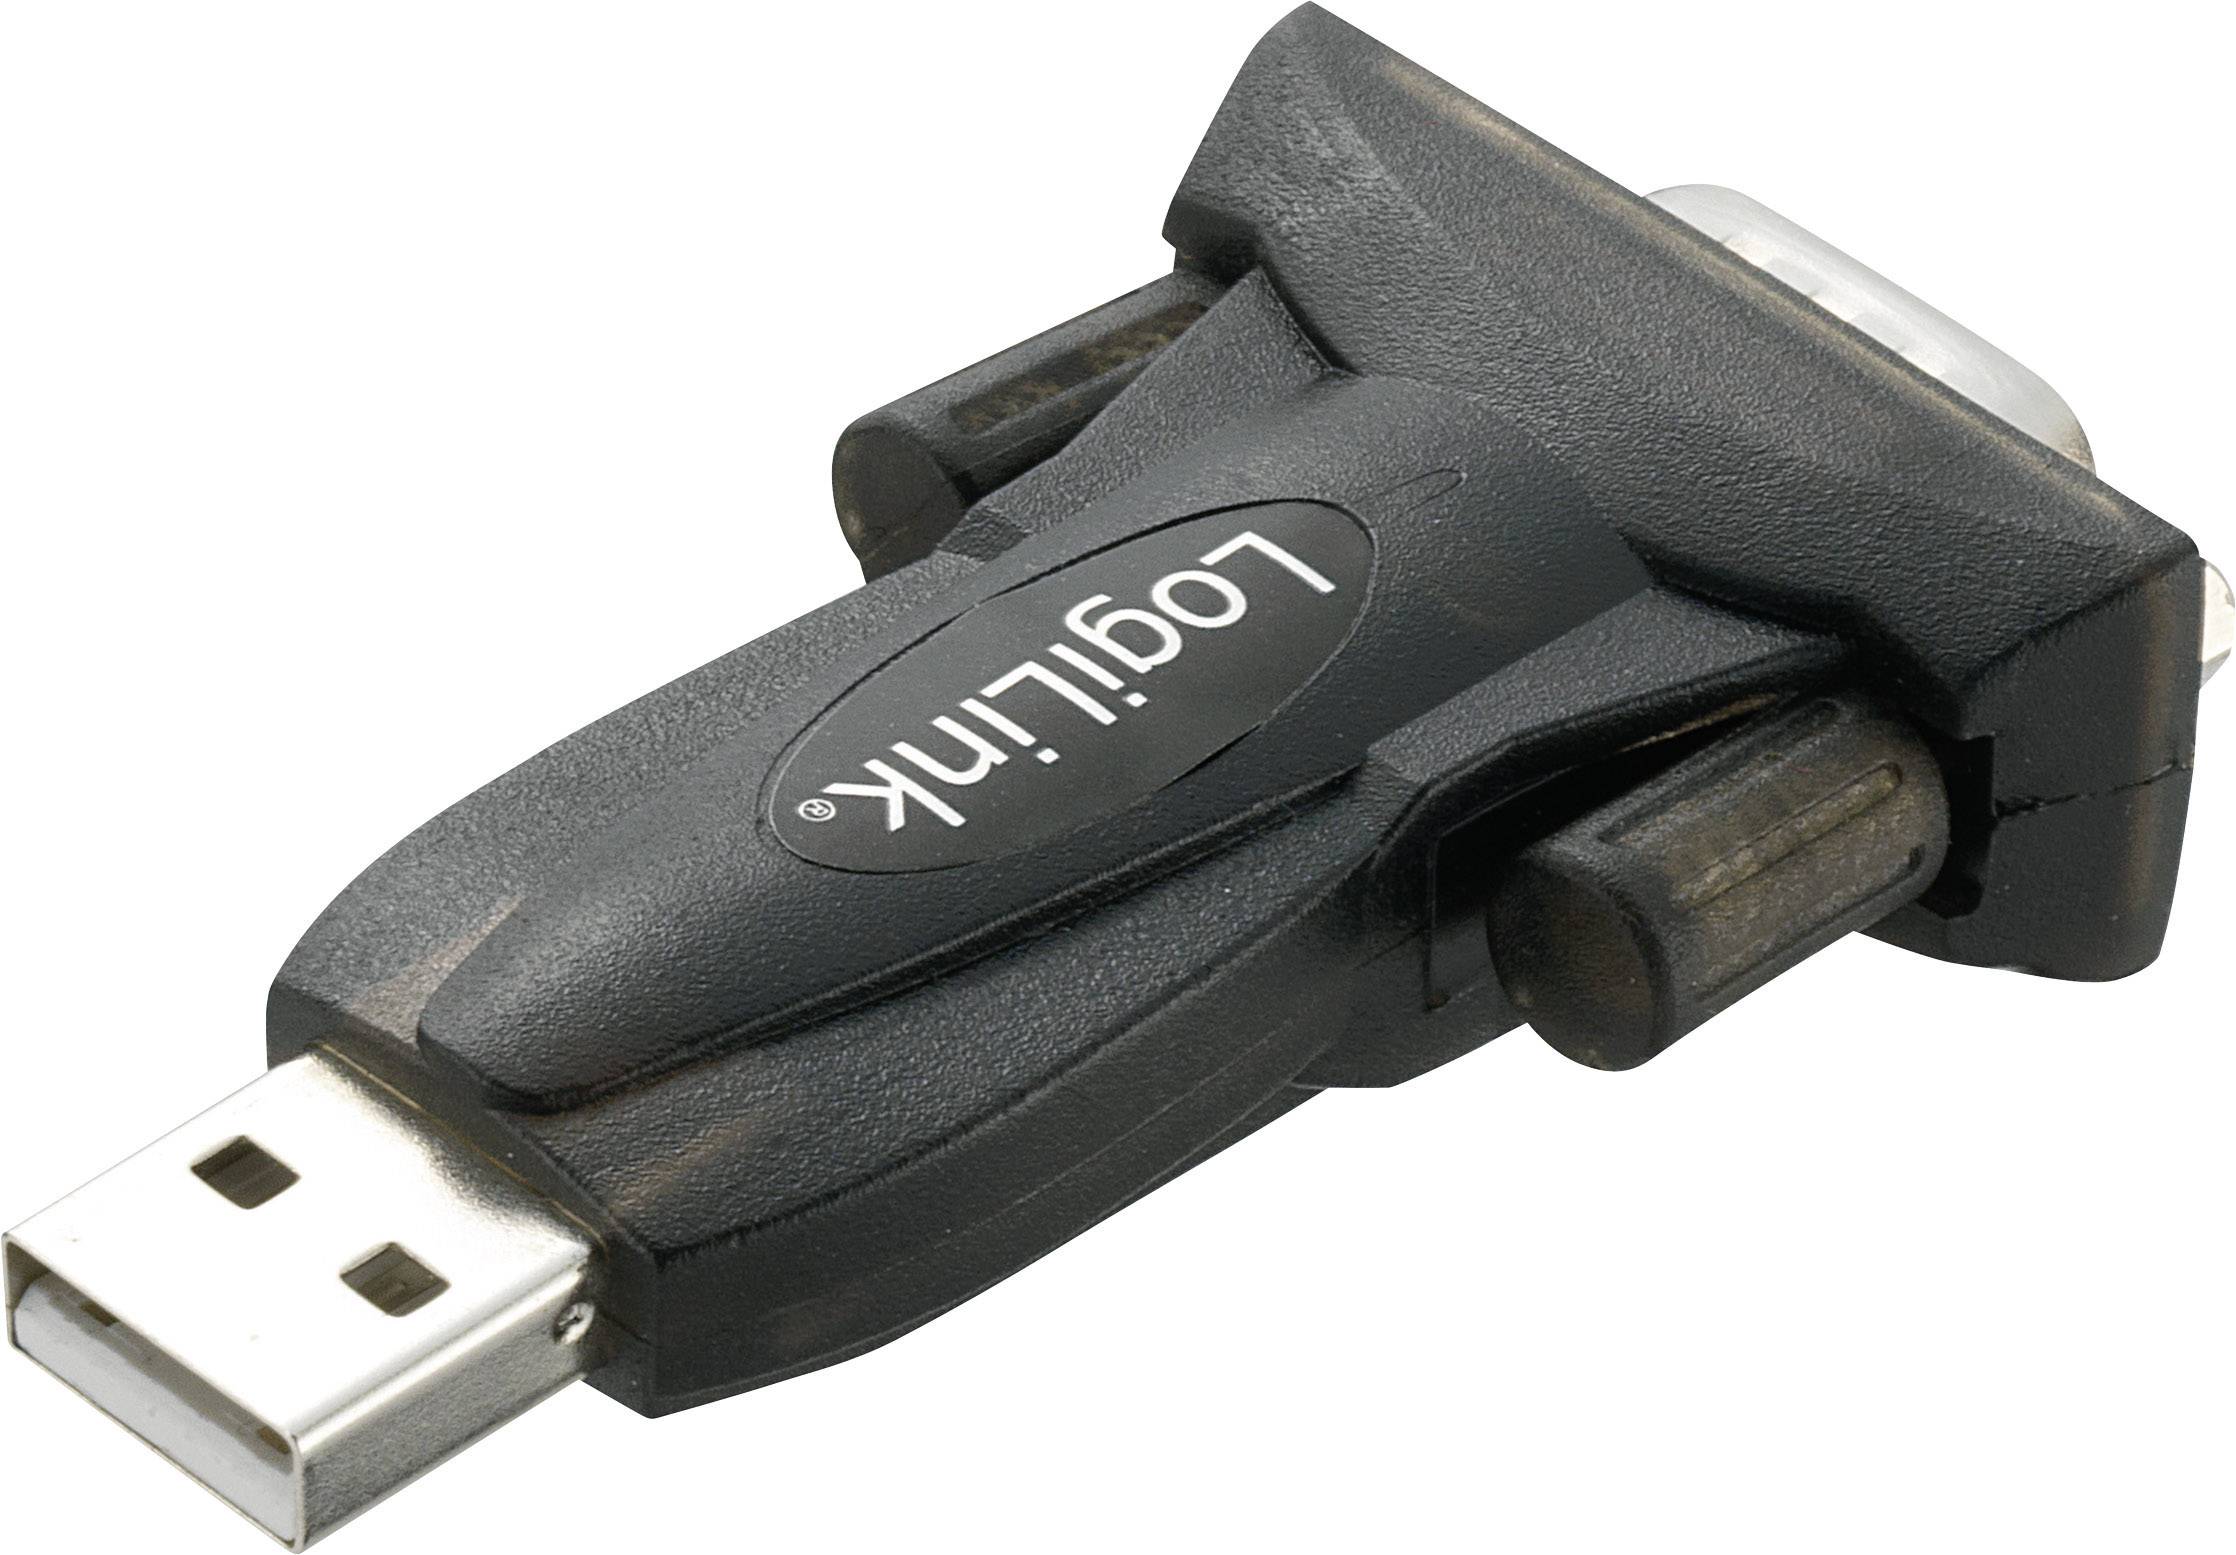 logilink usb 2.0 to serial adapter driver